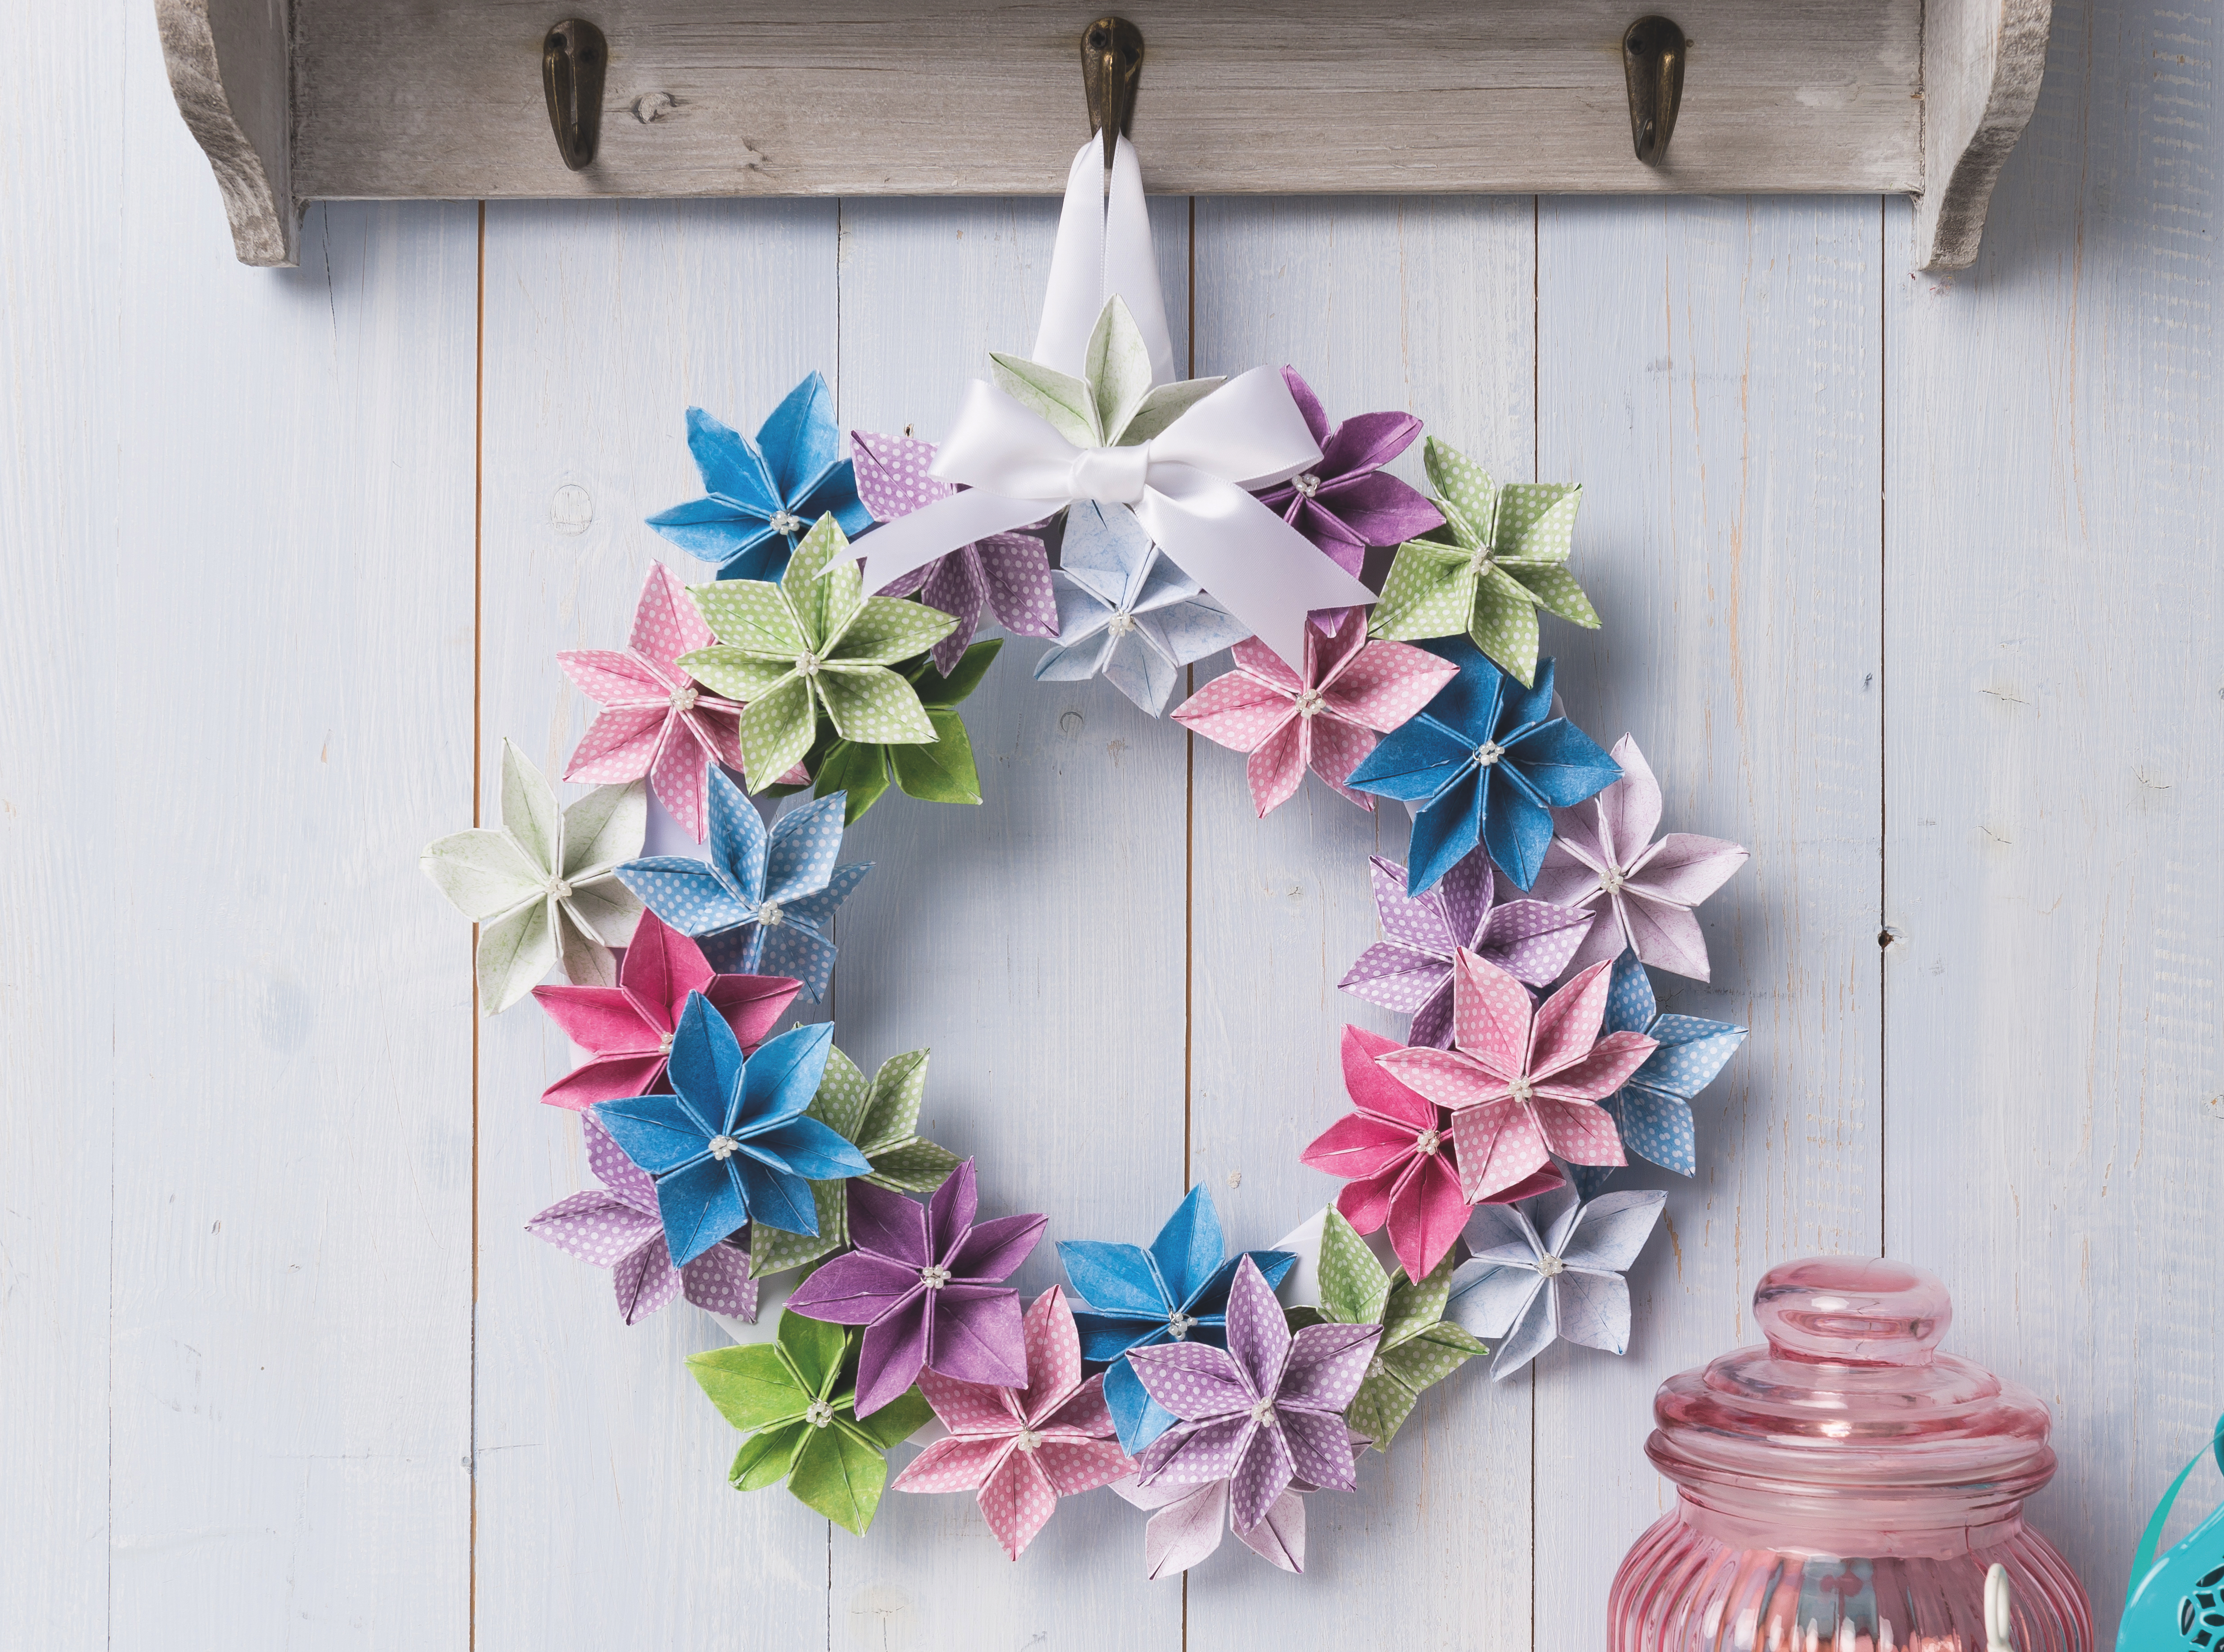 How to make an origami wreath – step 3